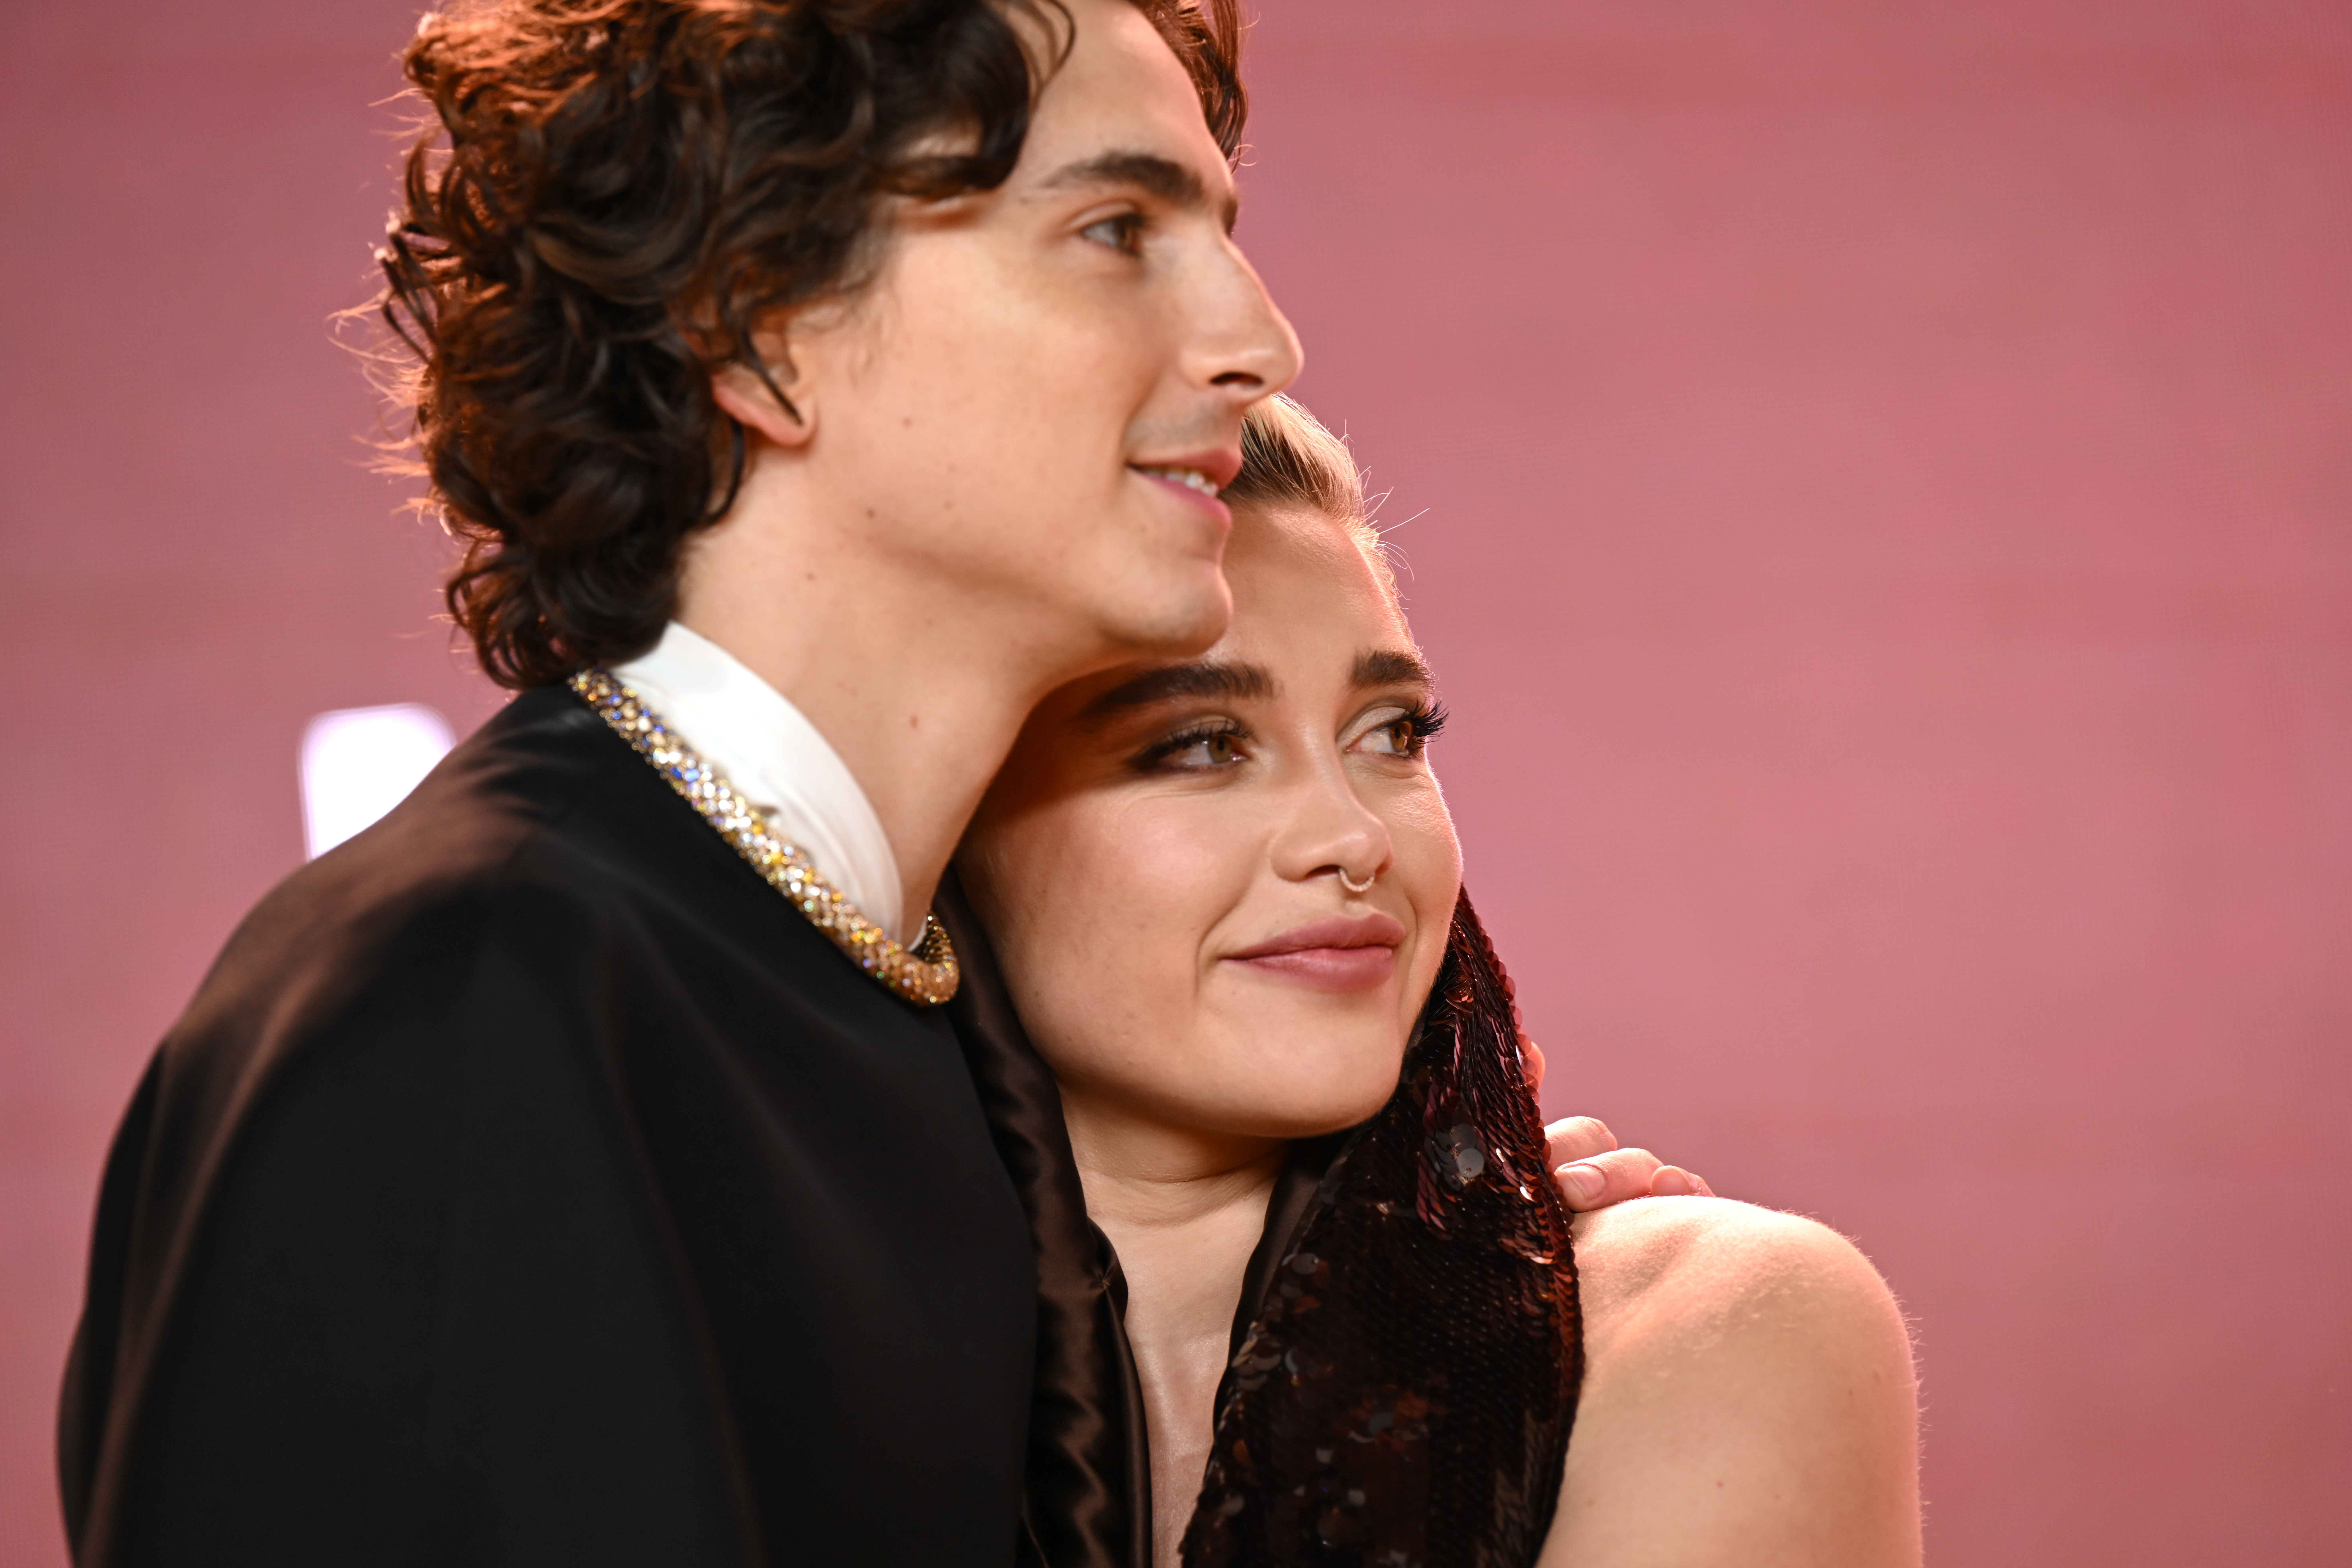 Last week, fans noticed how much 'chemistry' Timothee has with his co-star Florence Pugh